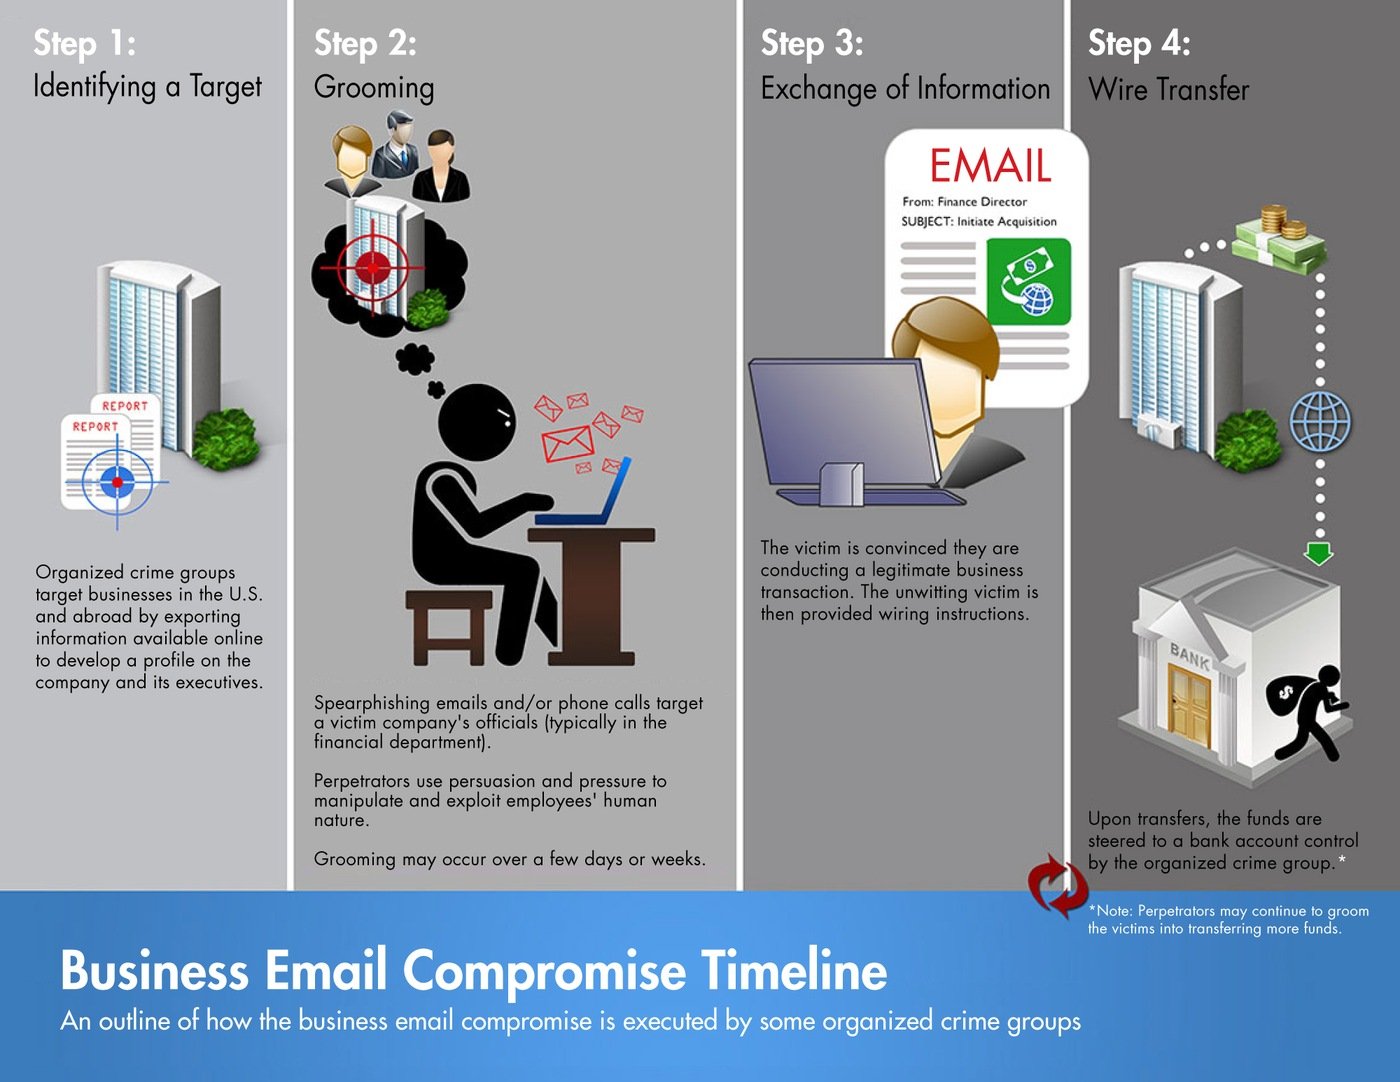 Outline of how the business e-mail compromise is executed by some organized crime groups, from identifying a target to grooming to exchanging information to receiving a wire transfer from the victim.